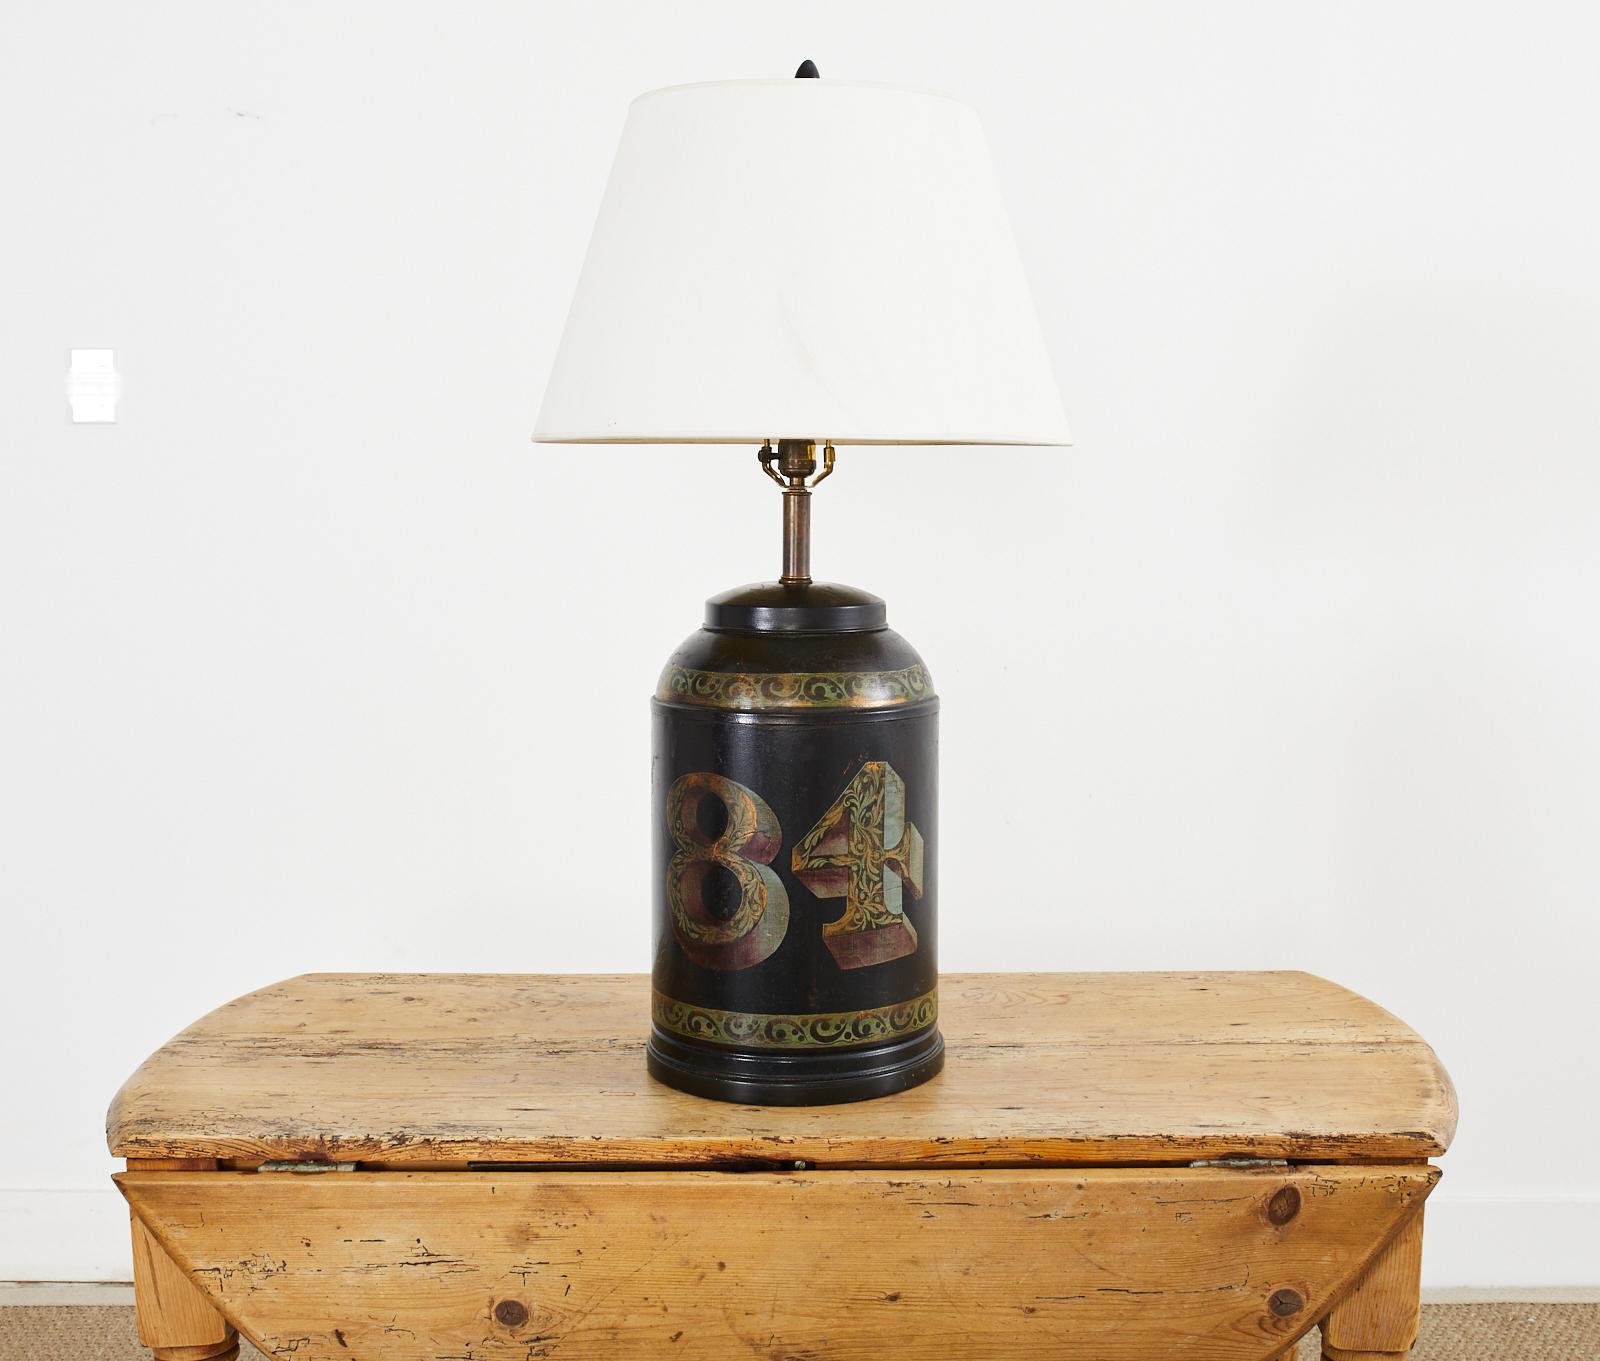 Vintage tea canister tole lamp finished overall in black with a decorative gilt number 84 and foliate designs in gold, green, and oxblood color. Brass hardware with harp and finial. Lamp shade not included.